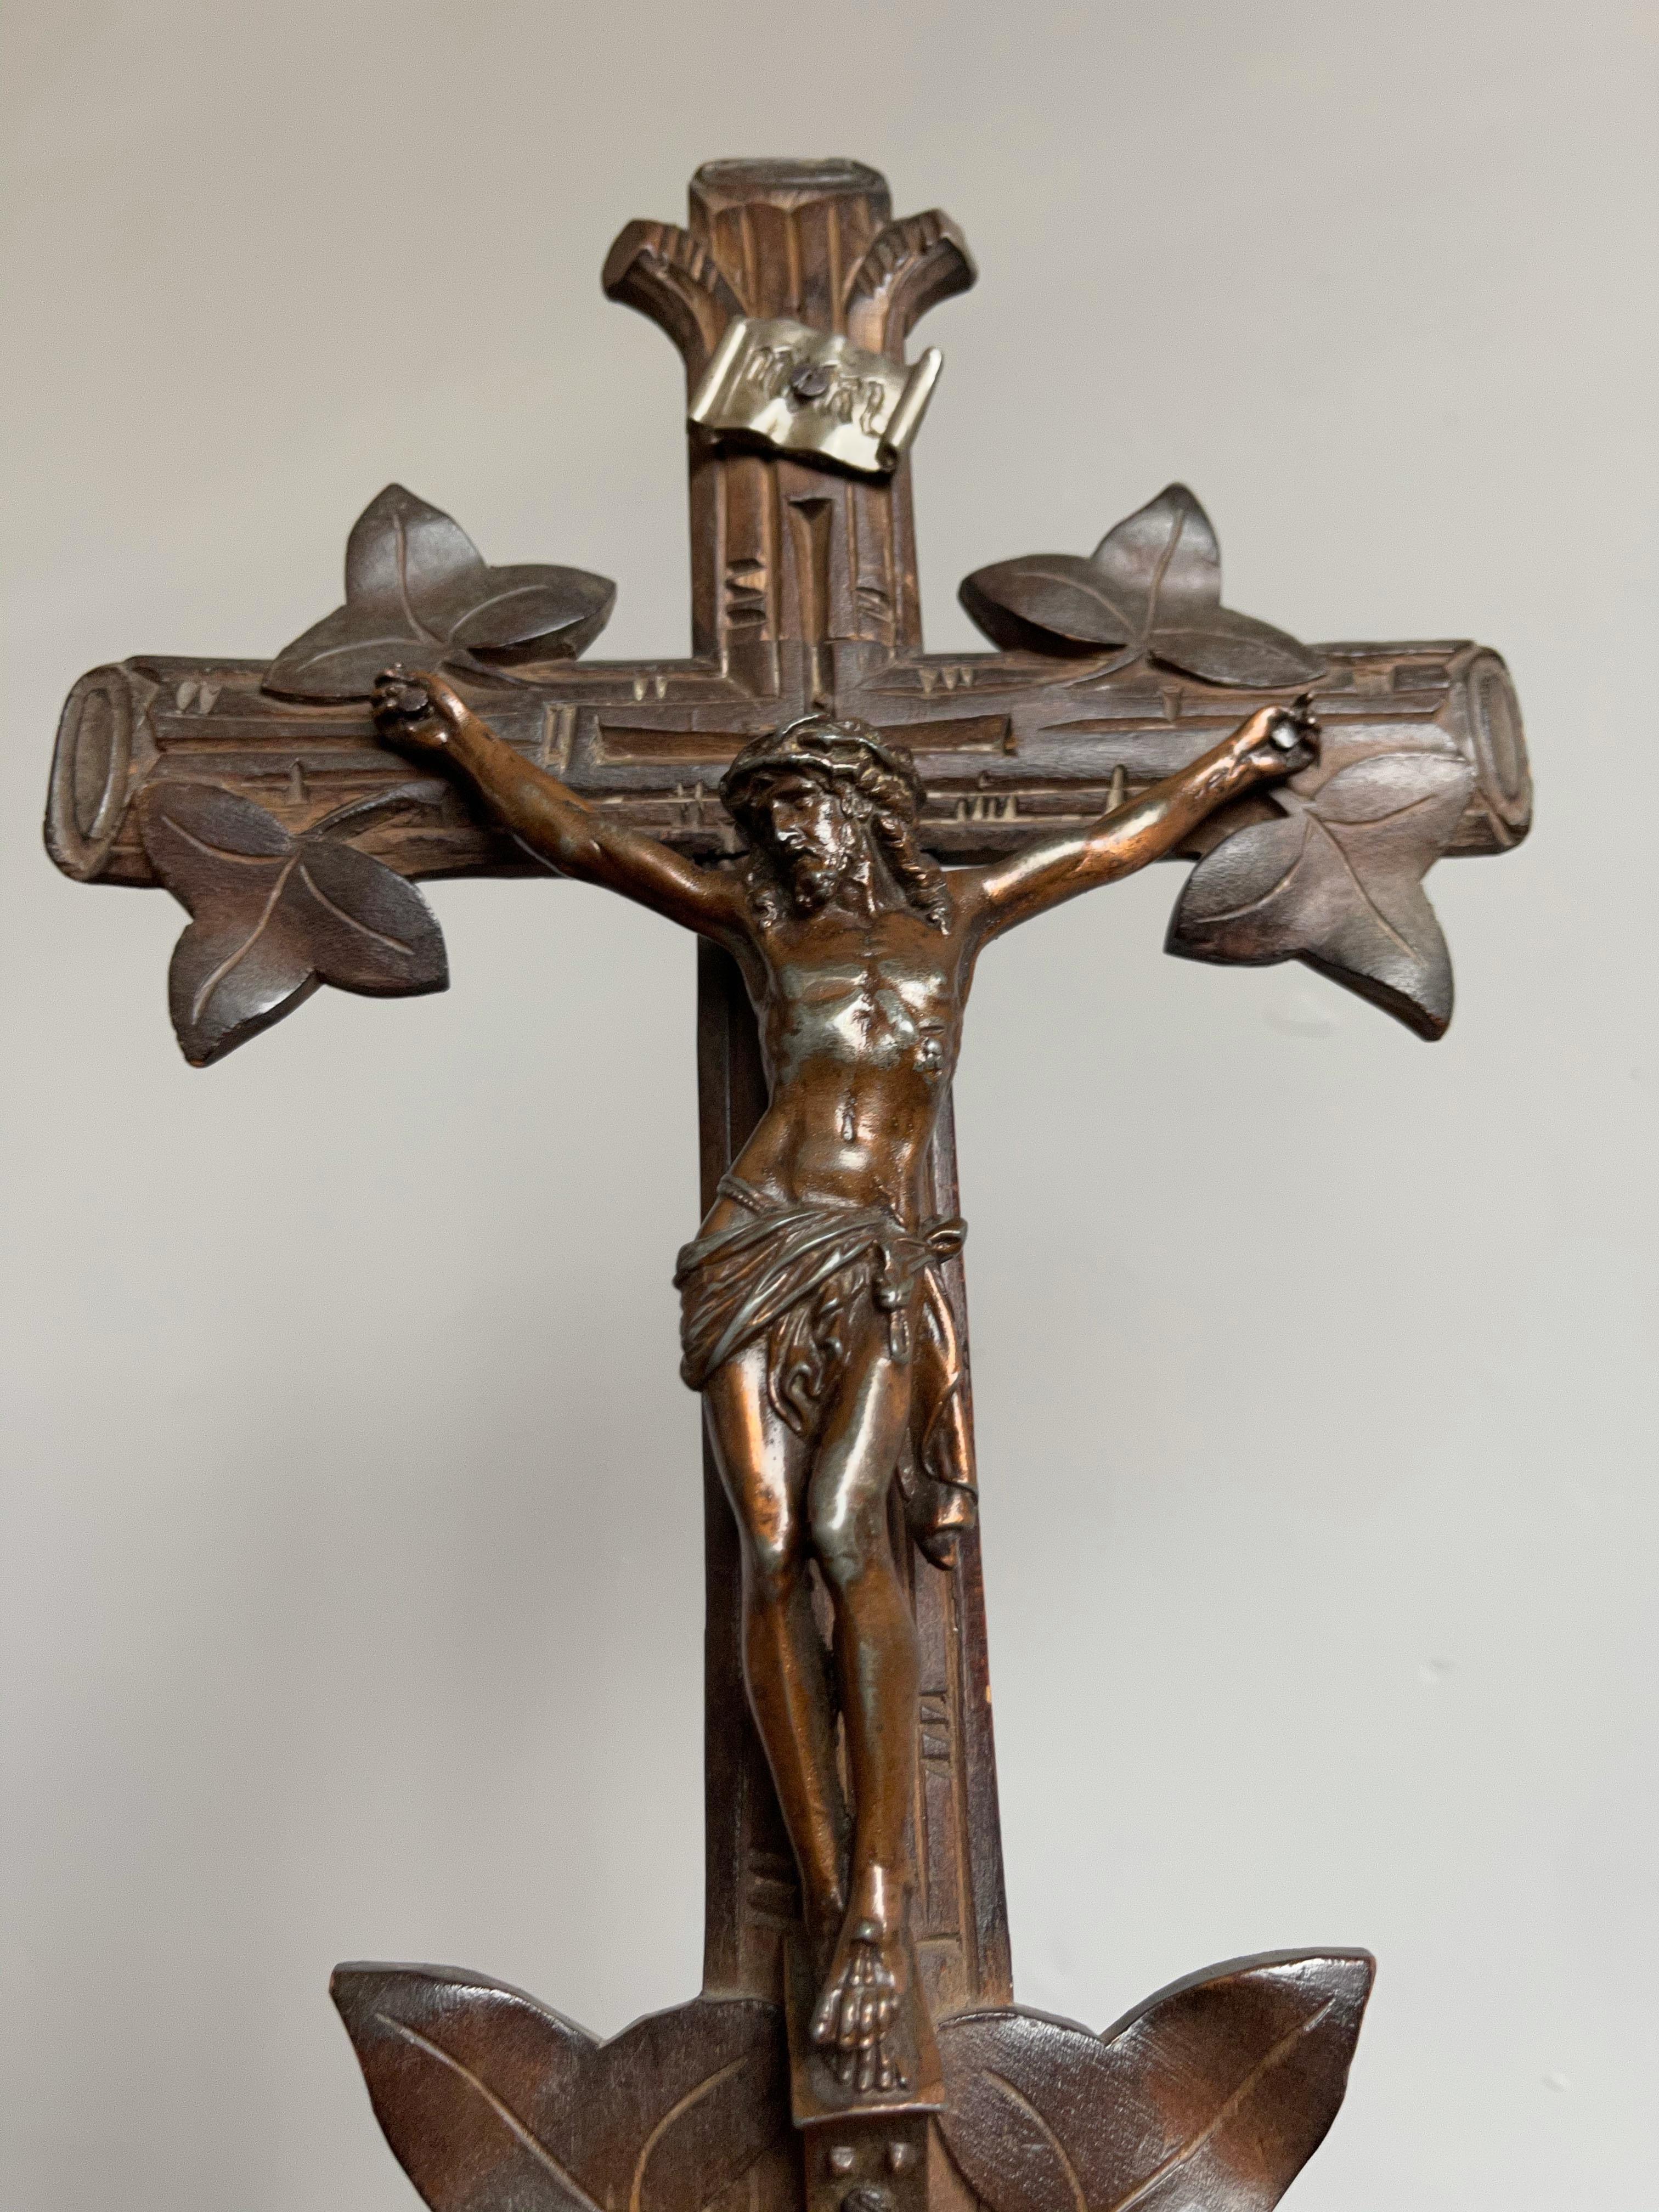 Beautifully hand carved Black Forest cross with matching size corpus.

Over the decades we have sold a number of unique and interesting crucifixes, but we had not yet come across a branches and leafs entwined table cross in the Swiss Black Forest